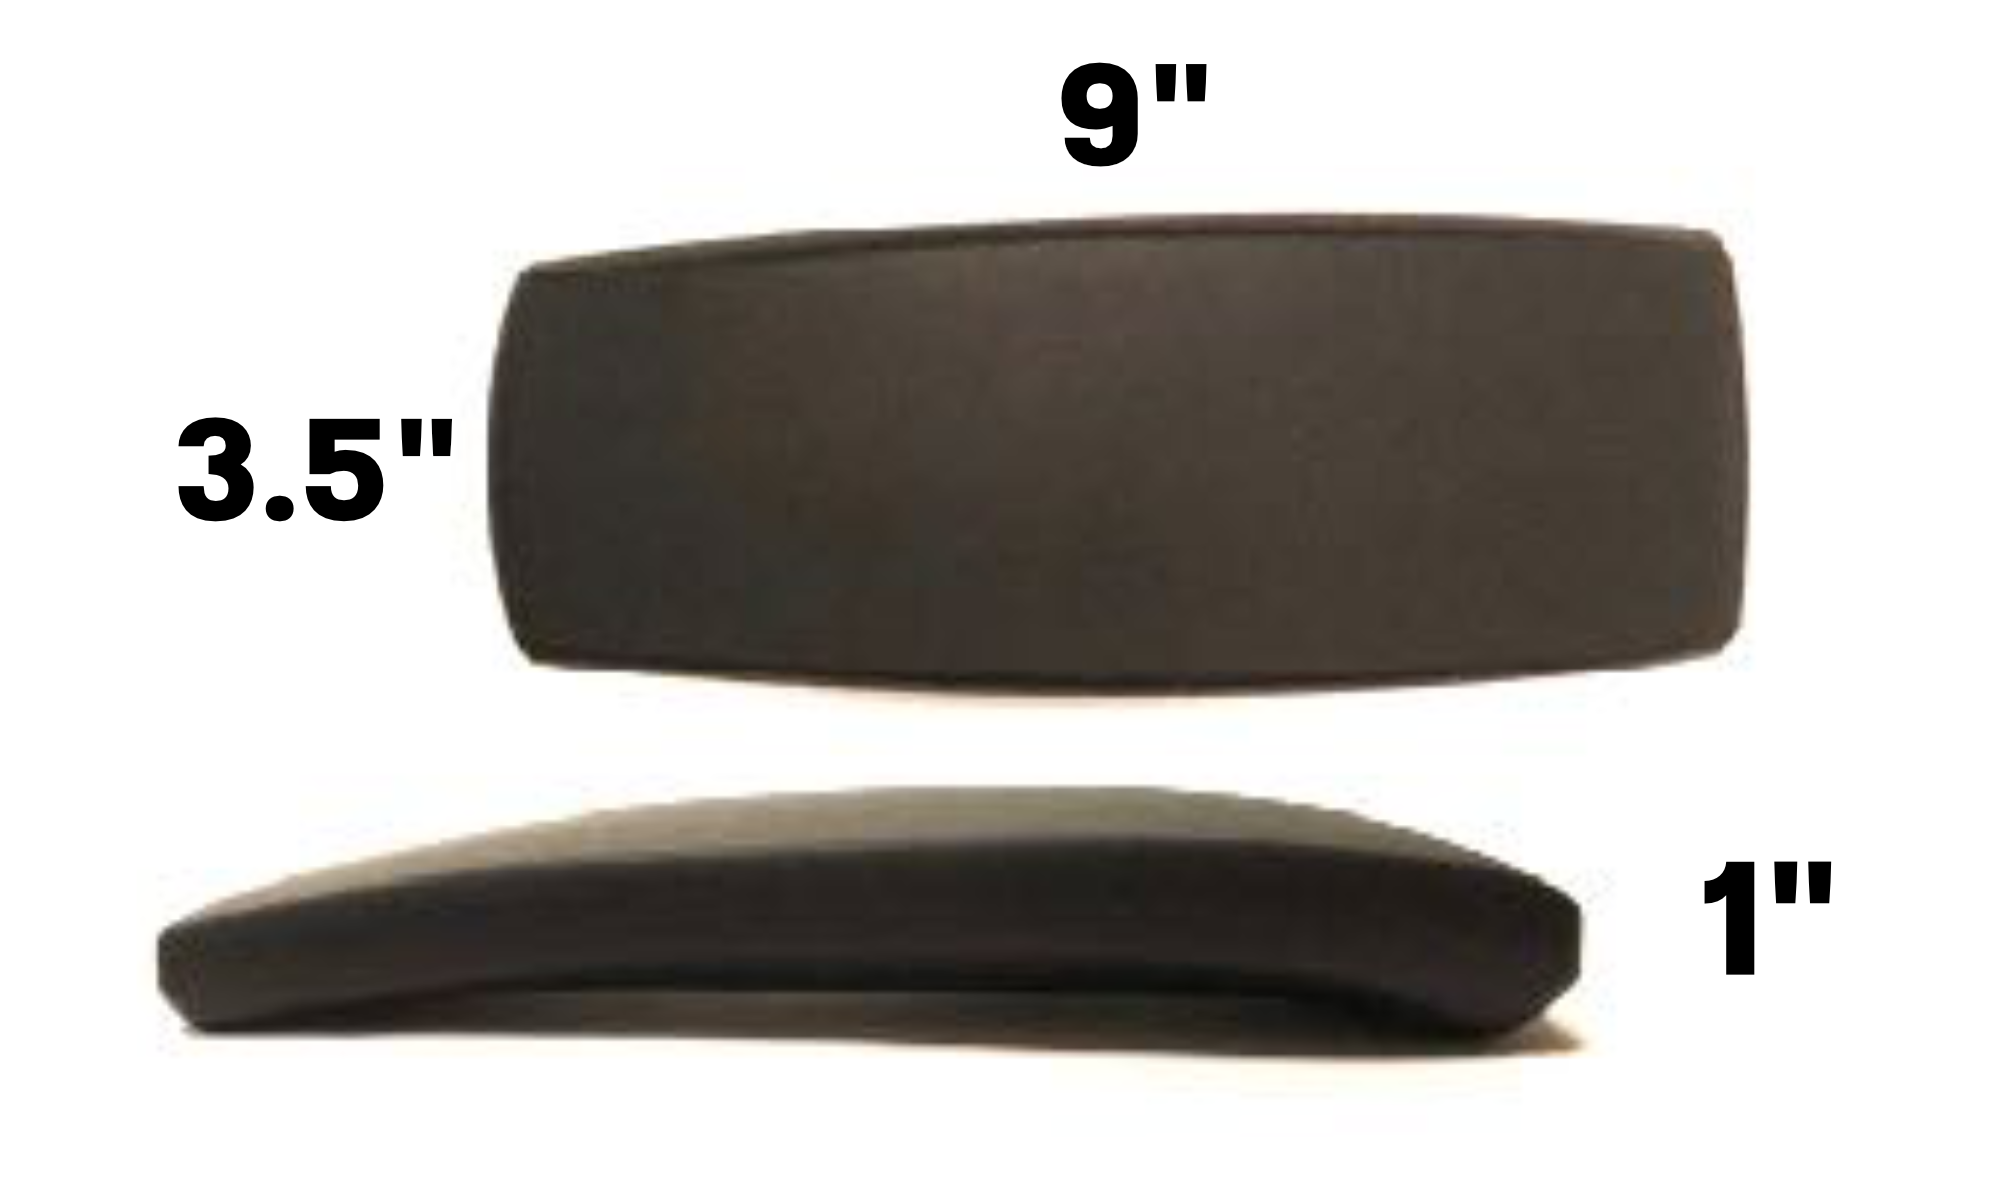 10P - Standard fuse urethane pad with metal core